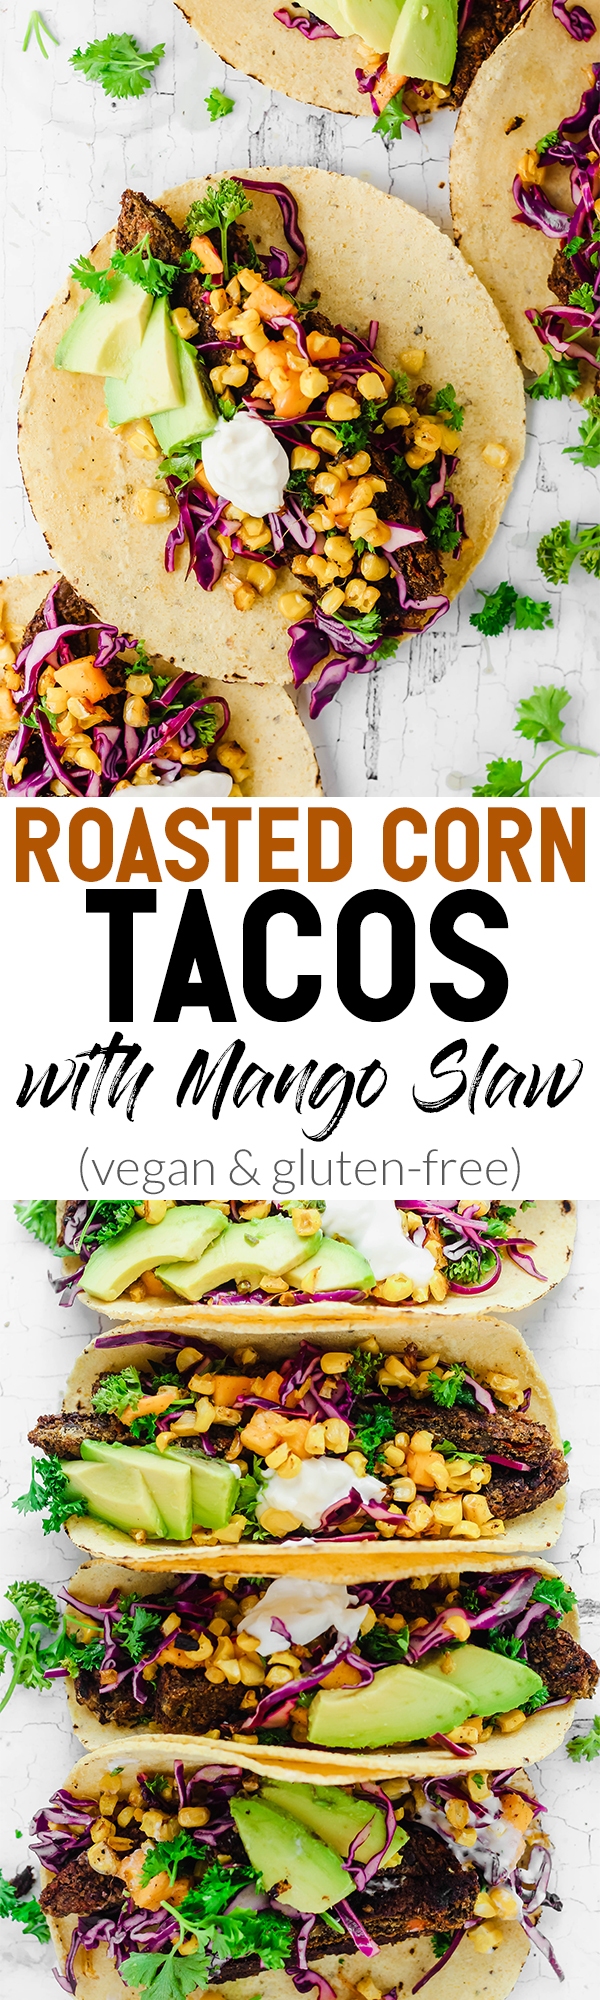 These Roasted Corn Tacos with Mango Slaw feature seasonal produce and hearty veggie burgers for a dinner recipe that comes together in under 1 hour. These will give you serious beach vibes! (vegan & gluten-free)